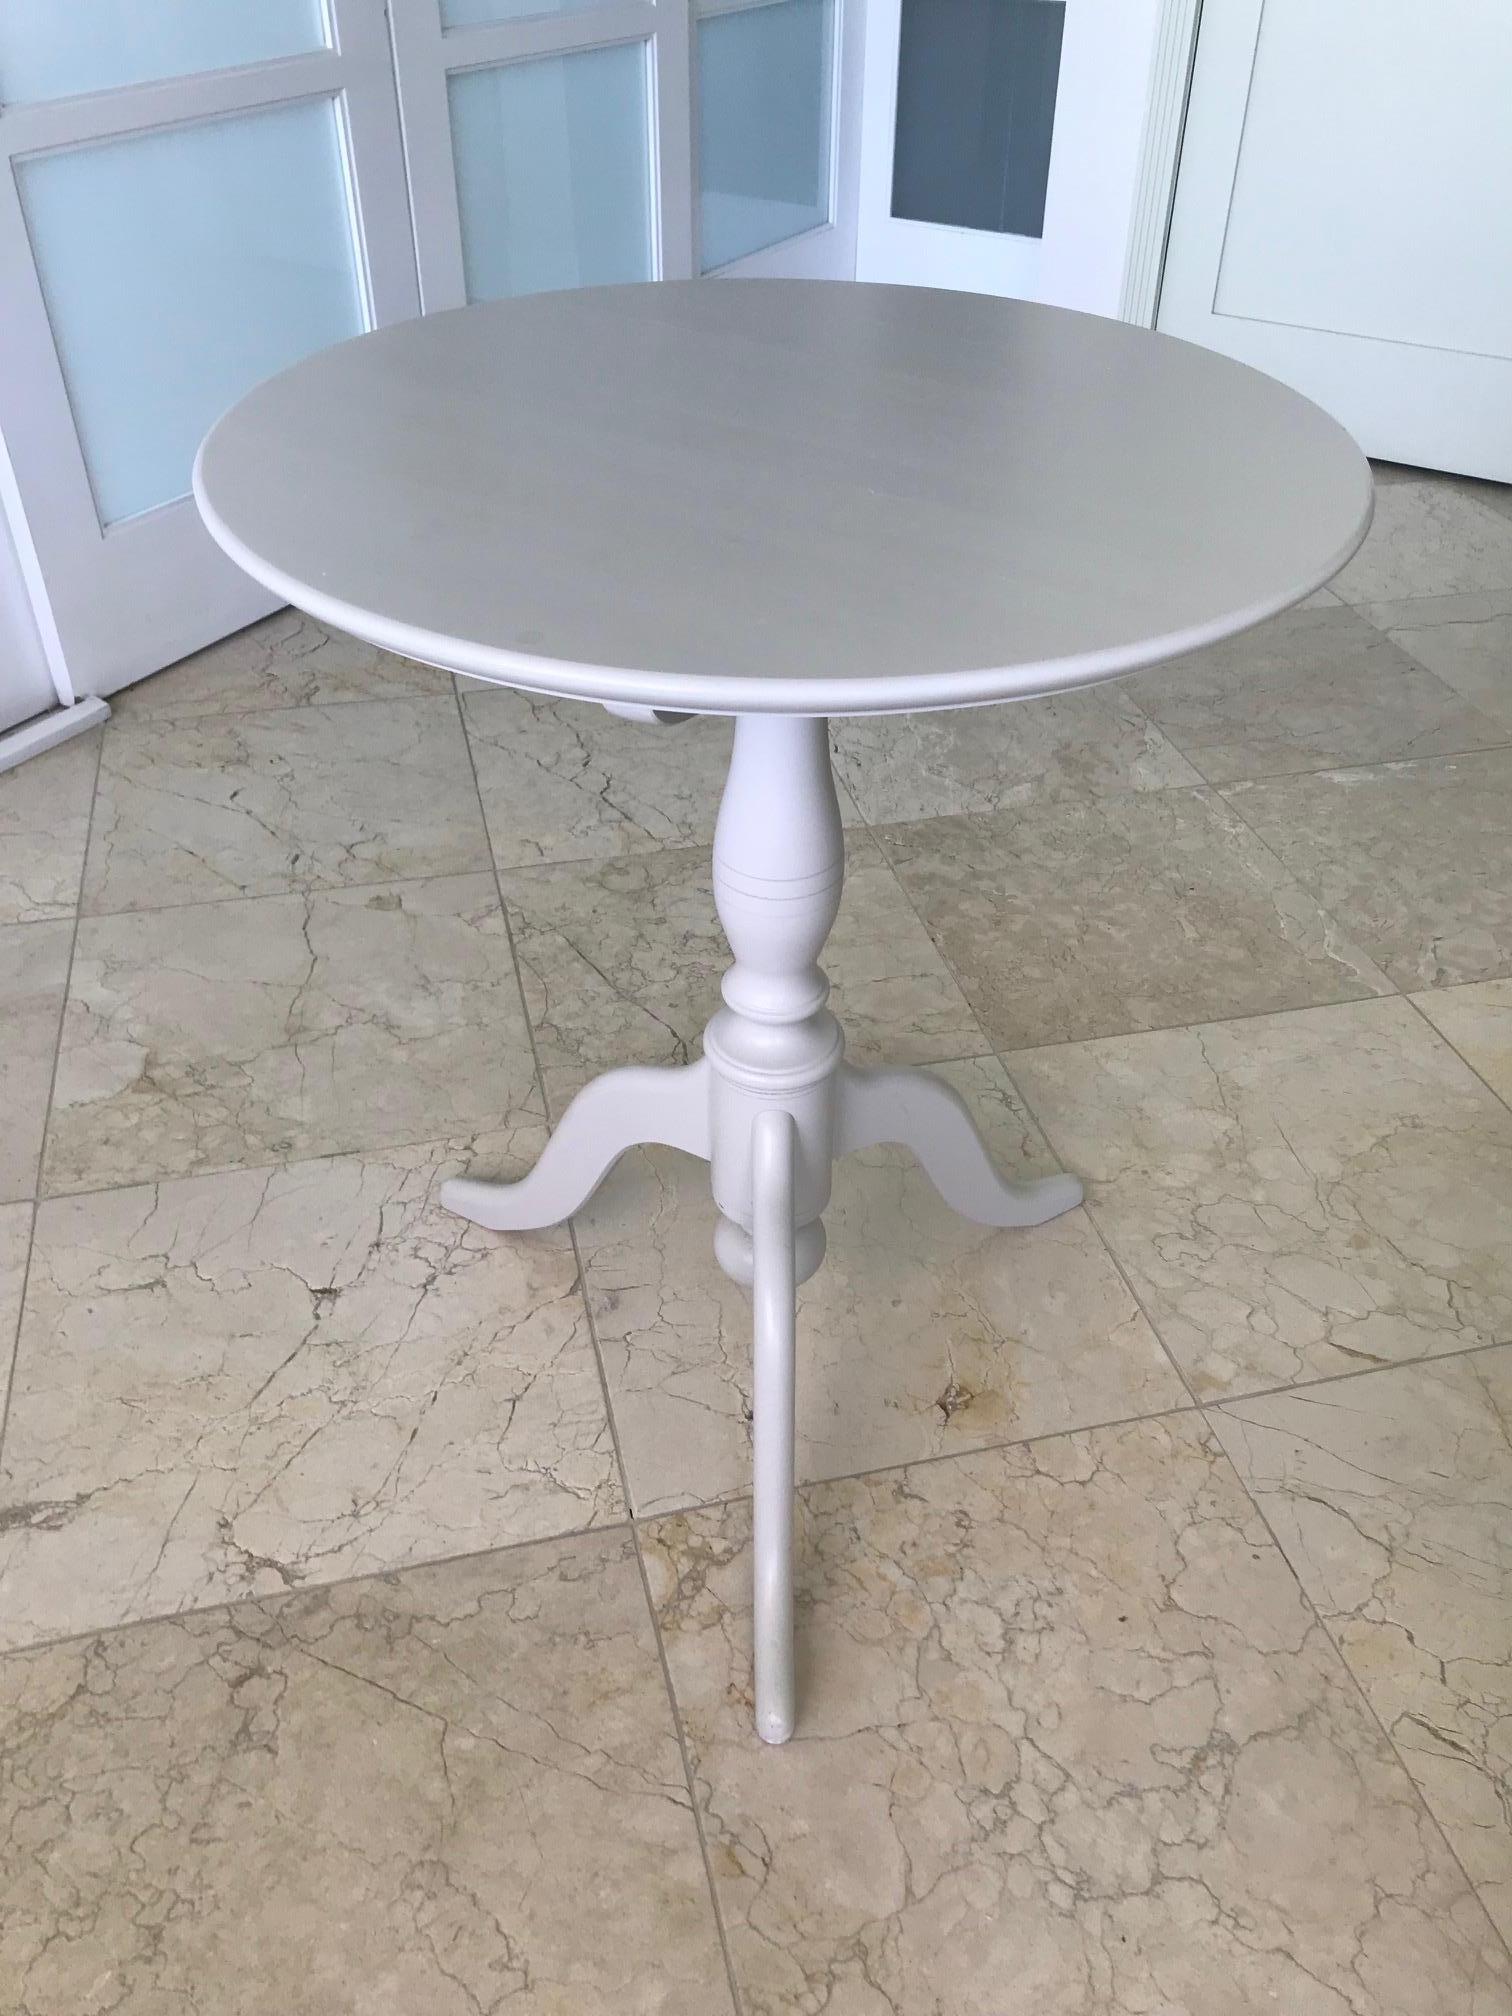 Based on Classic 19th century antique guéridon tables from Sweden featuring a round shaped tilt-top. This Gustavian style side table is hand painted in Classic gray / taupe finish. Elegant tilt-top over a turned wood pedestal base with hand carved